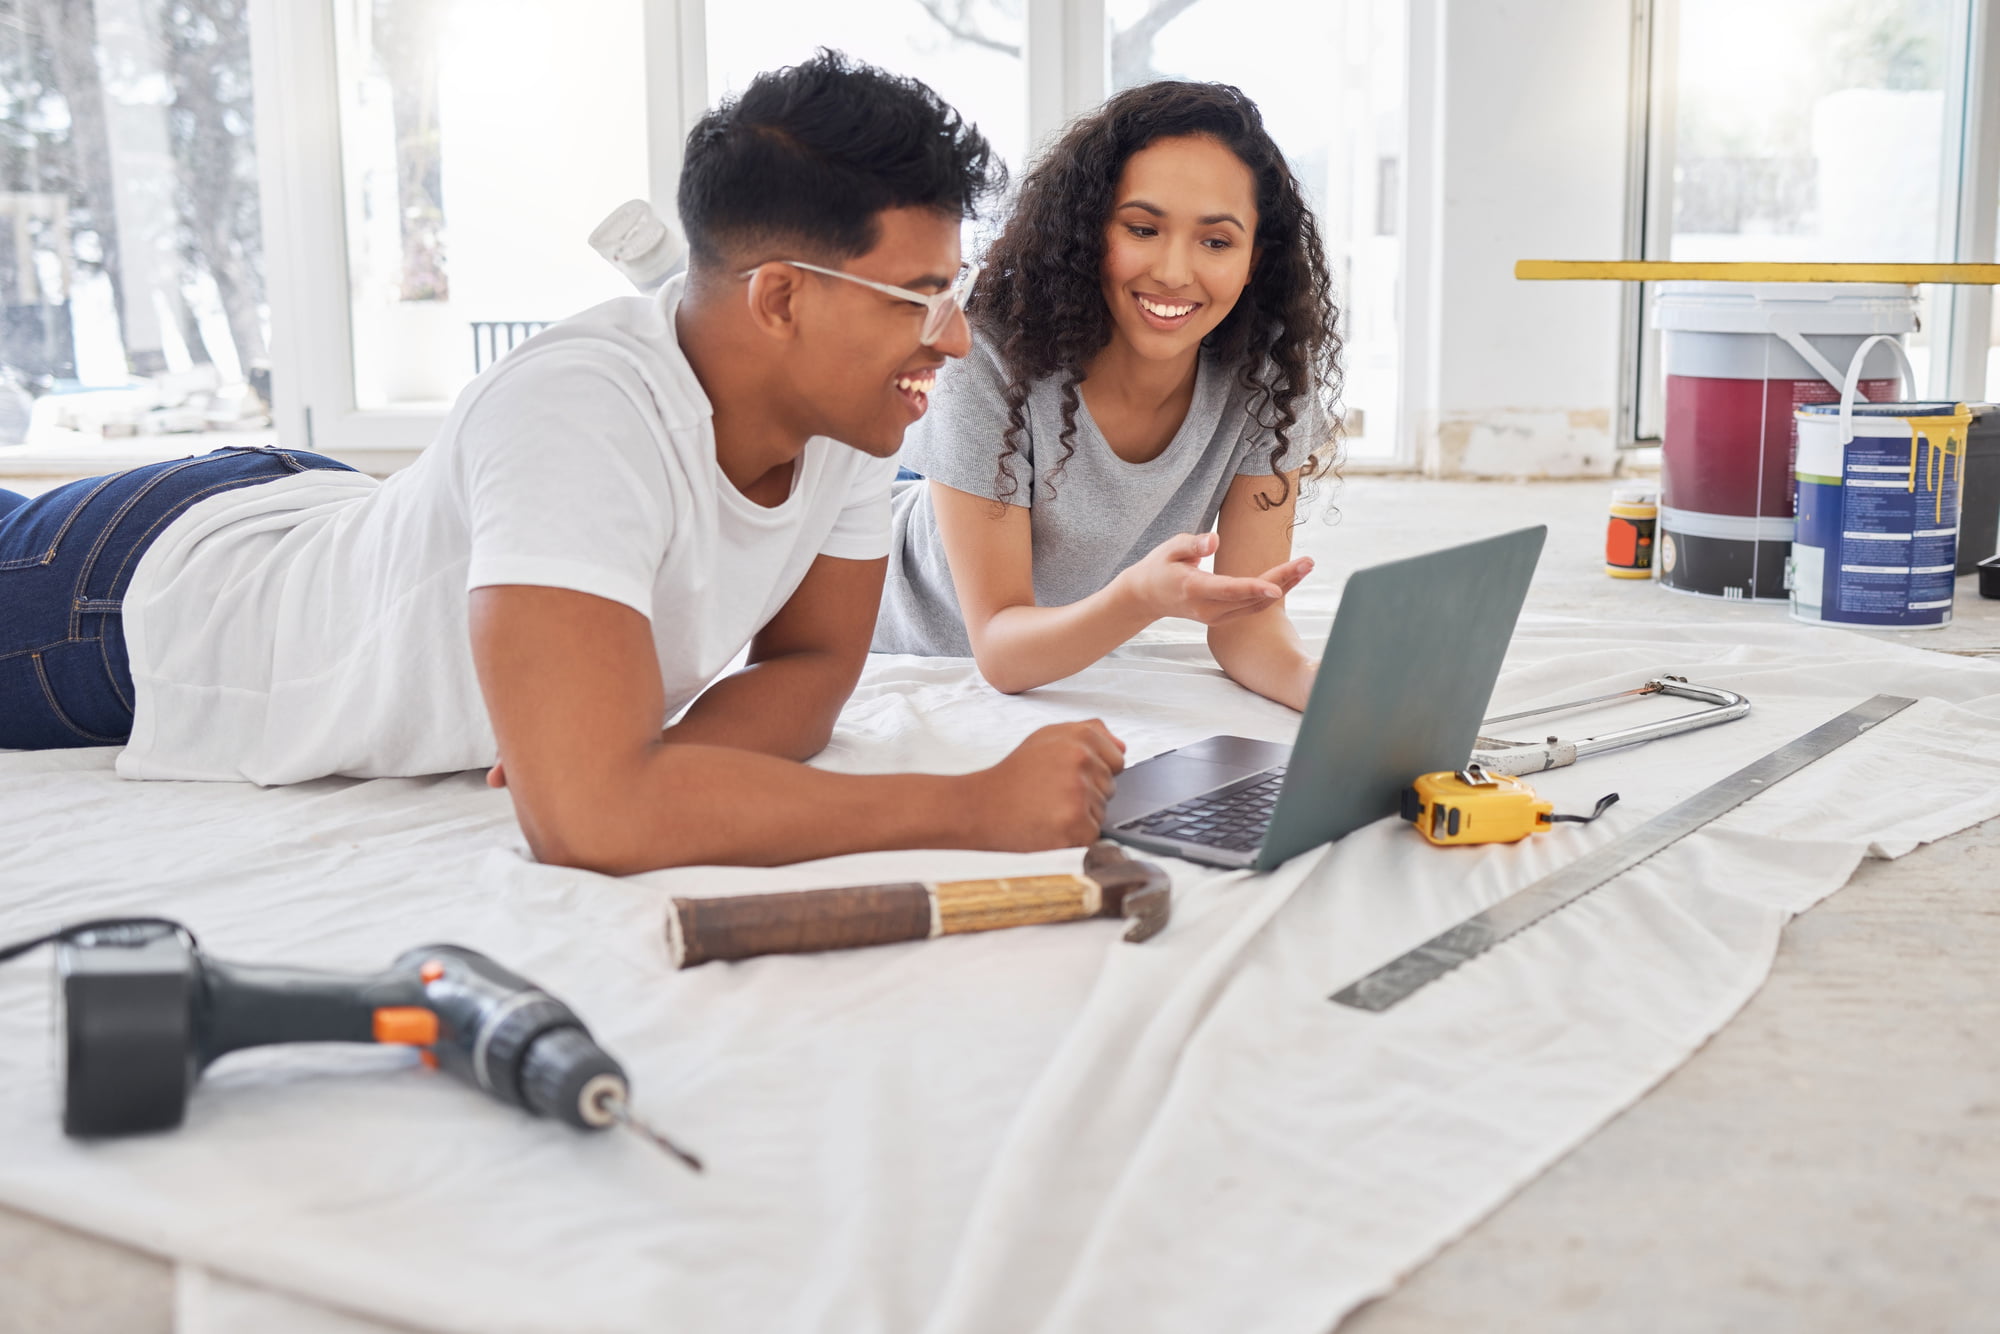 Laptop, renovation and diy planning with a couple in their new house together for remodeling design. Construction, real estate or property improvement with a man and woman discussing a home project